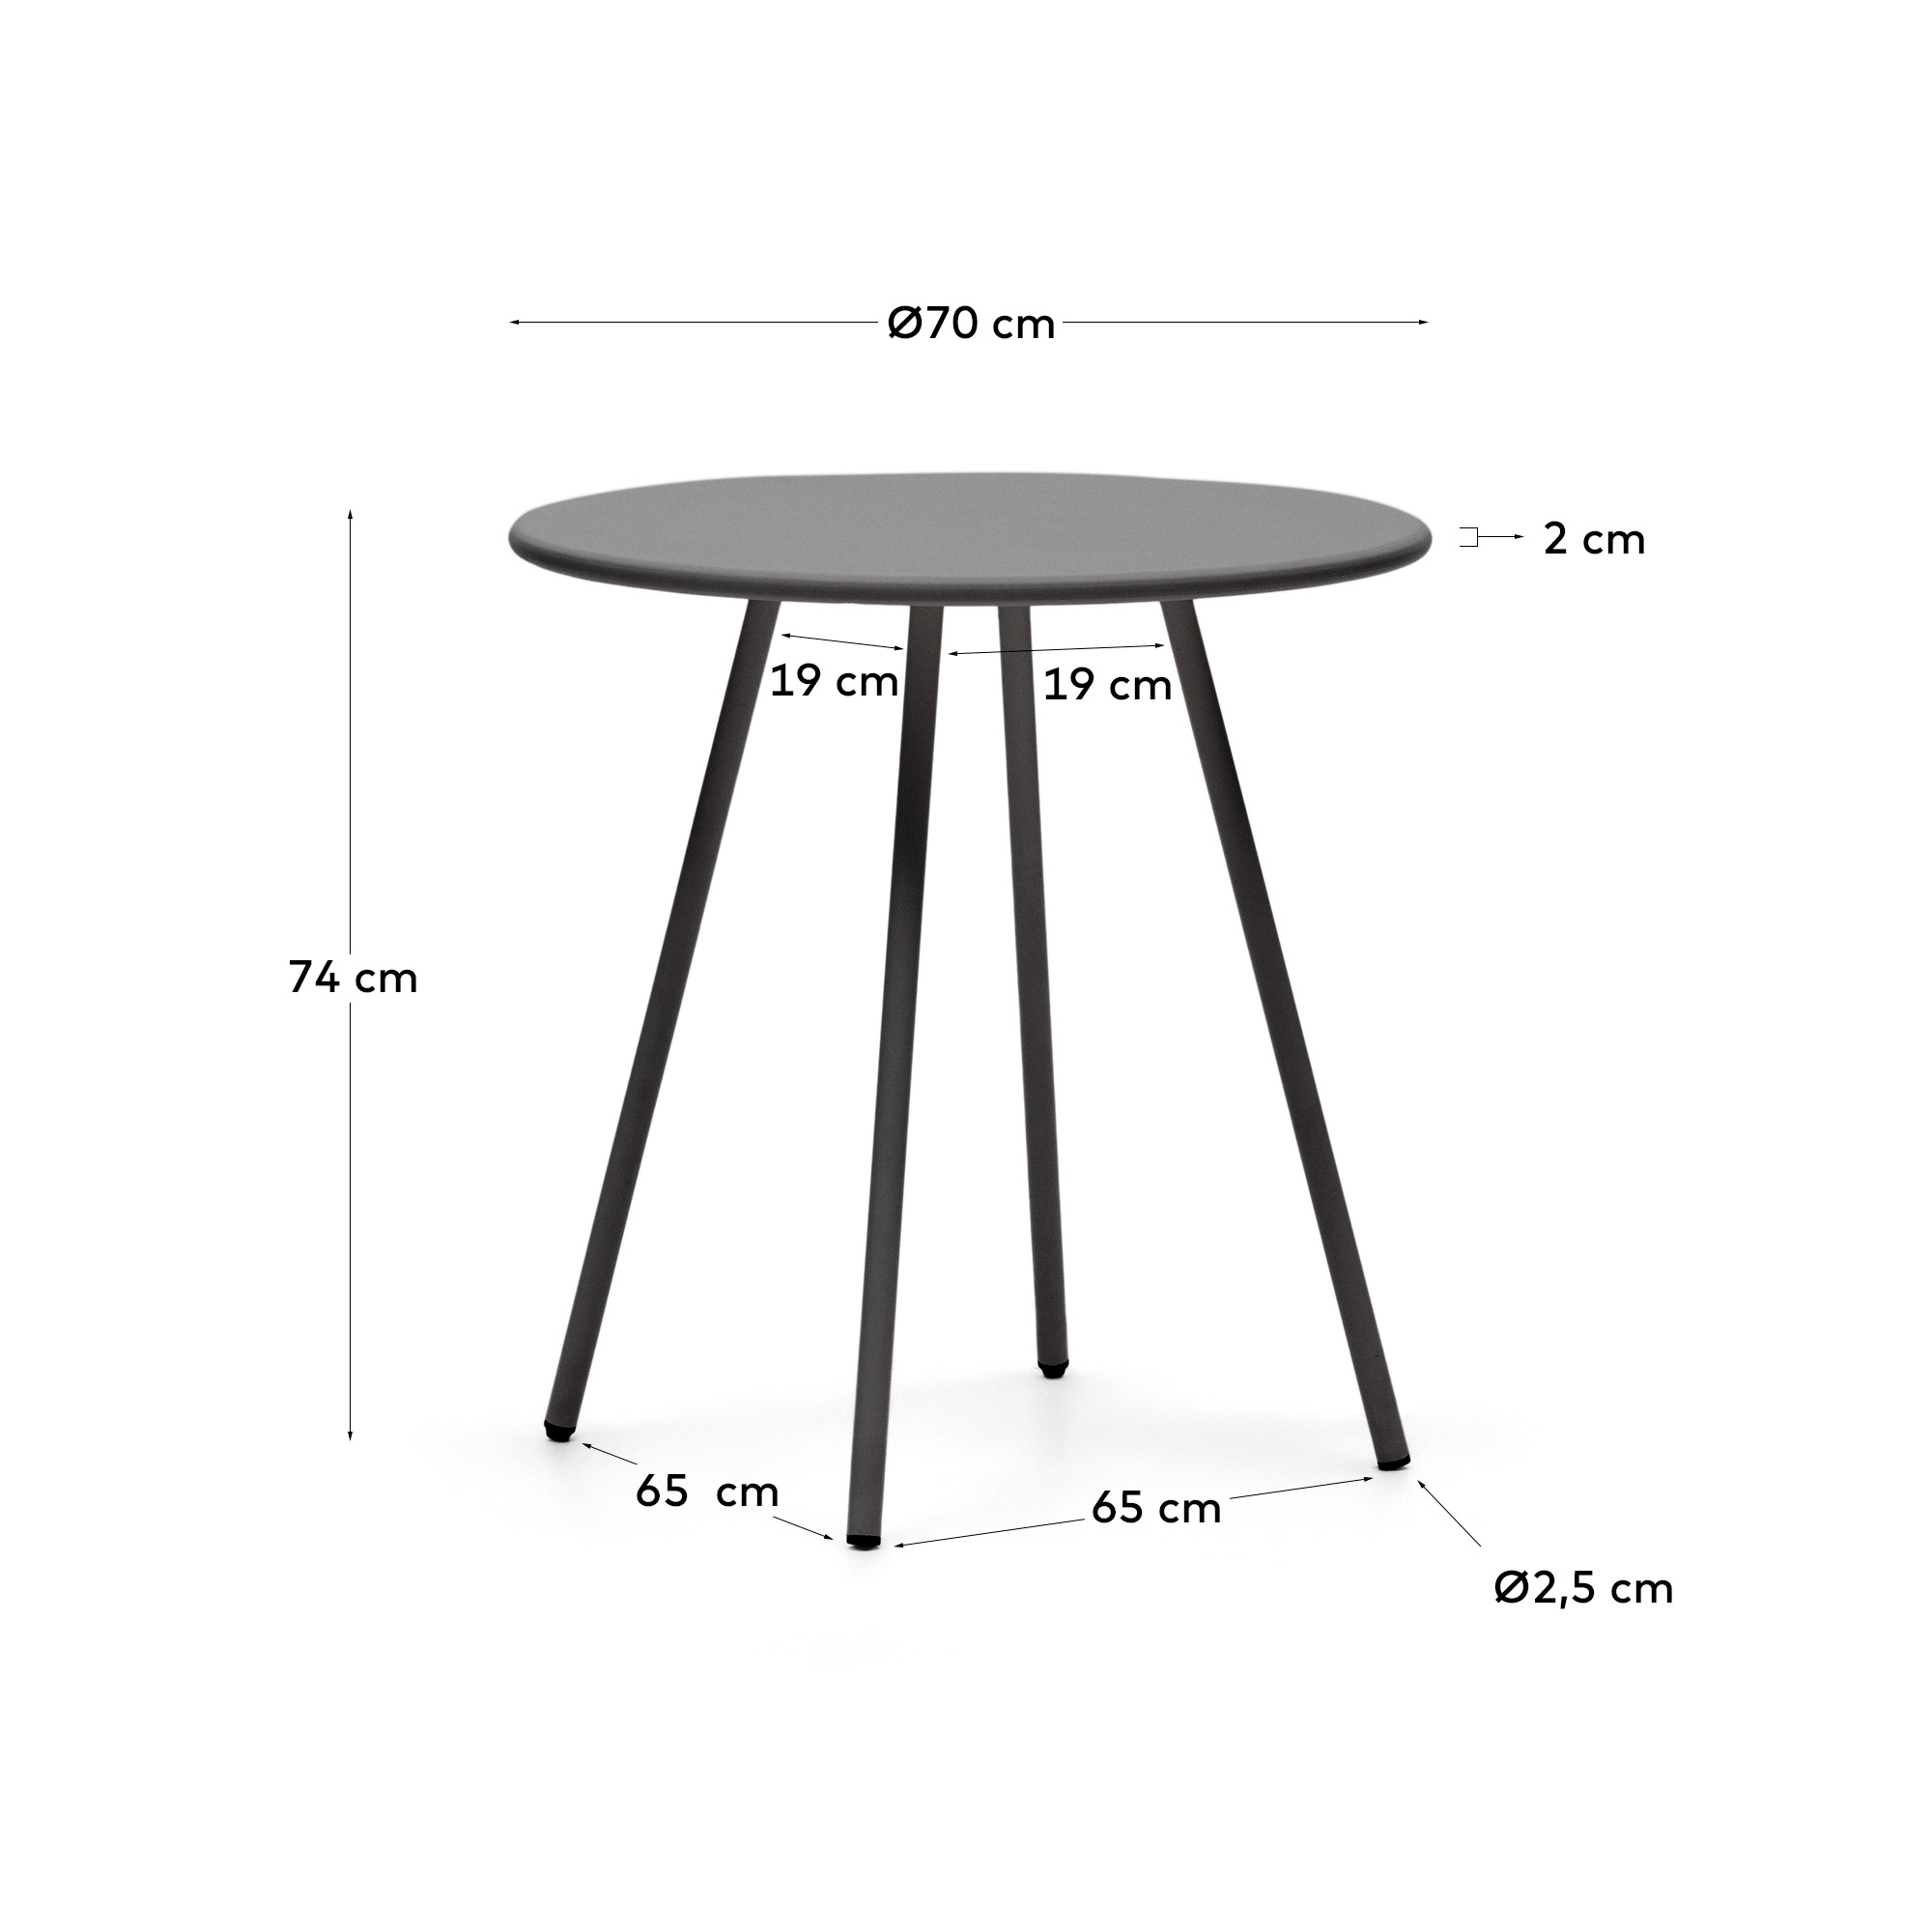 Montjoi round outdoor table in steel with a grey finish, Ø 70 cm - sizes